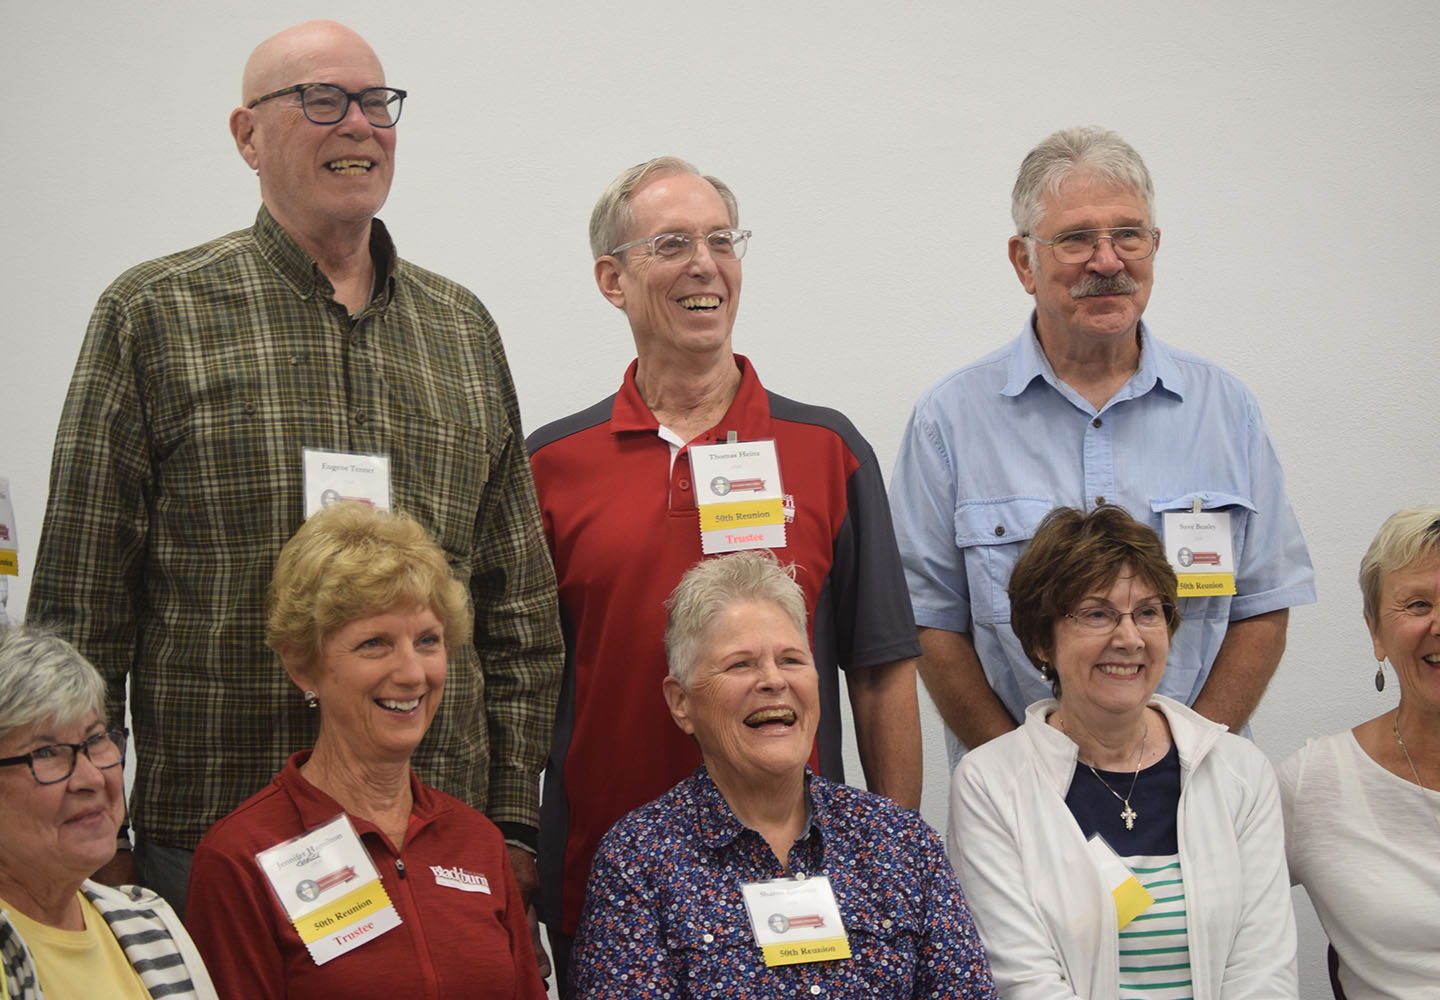 Alumni's posing for photo at the Reunion Class Brunch. HELP